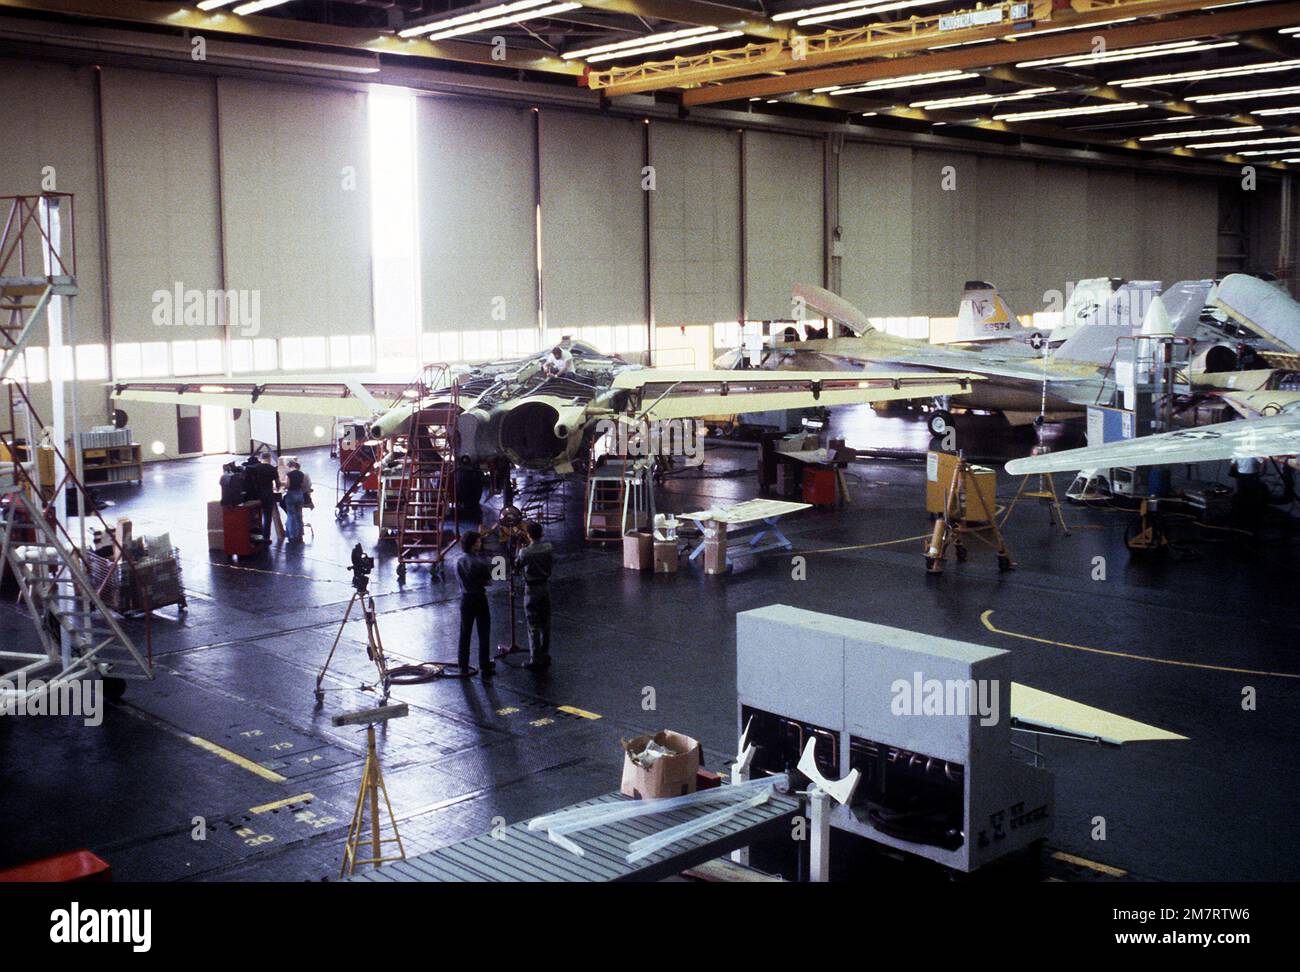 F-111 aircraft are being converted into EF-111A model aircraft at the ...